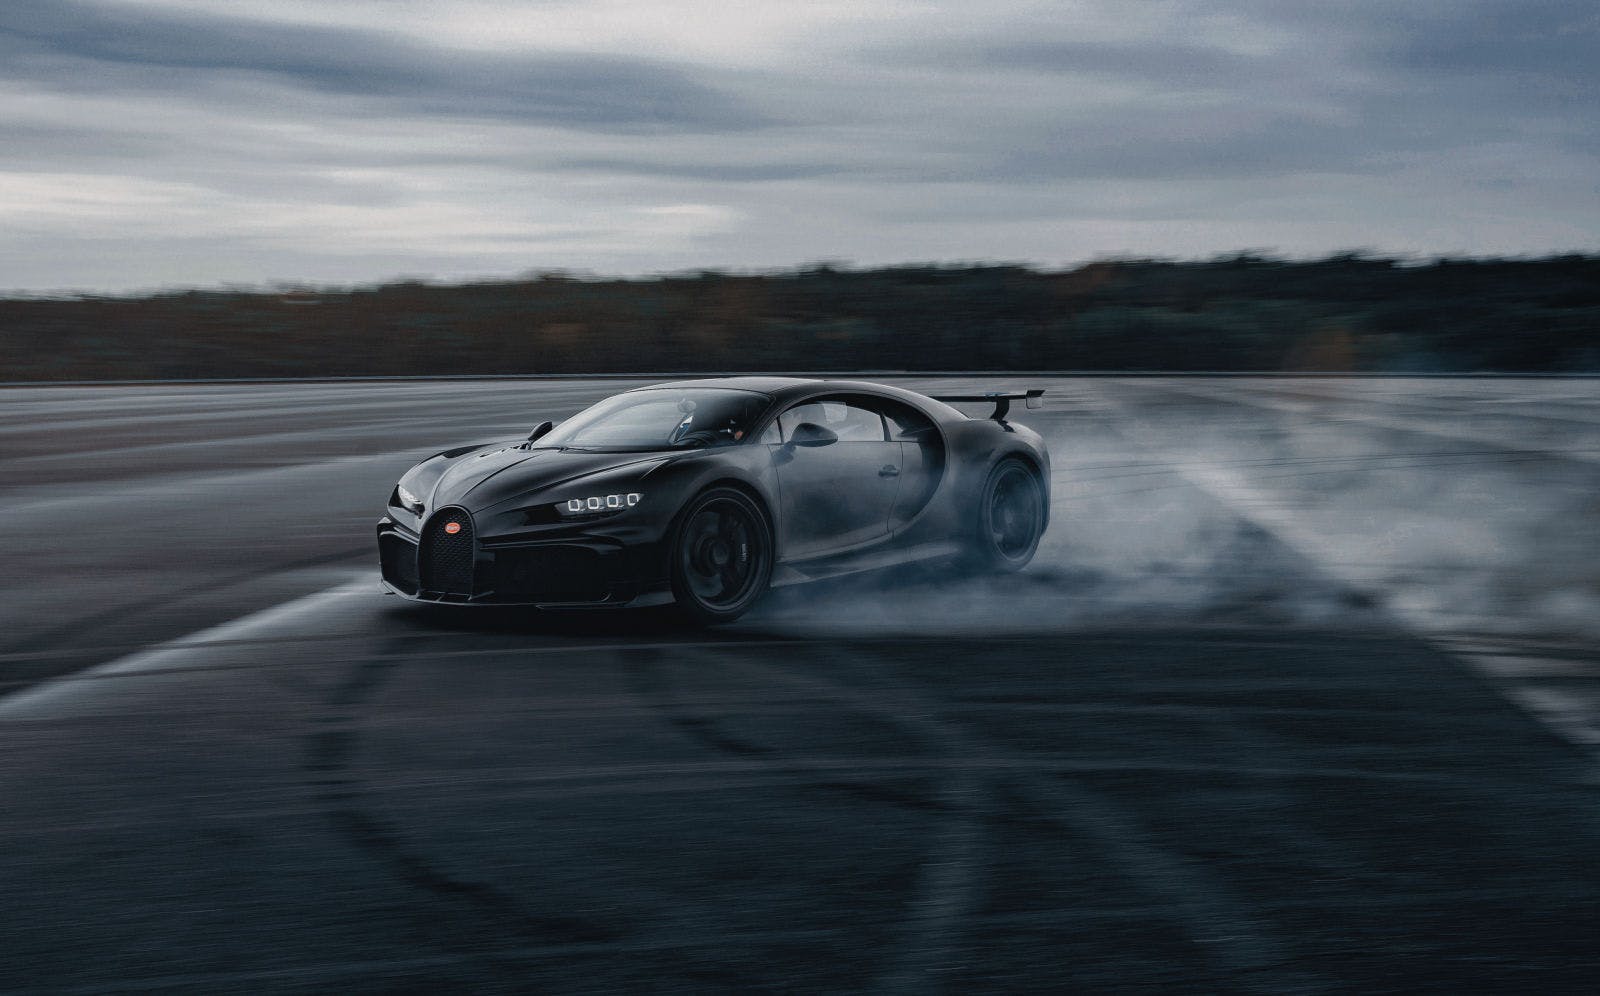 The Chiron Pur Sport launches into a controlled drift to create an arresting visual of Bugatti’s iconic C-line on the tarmac.